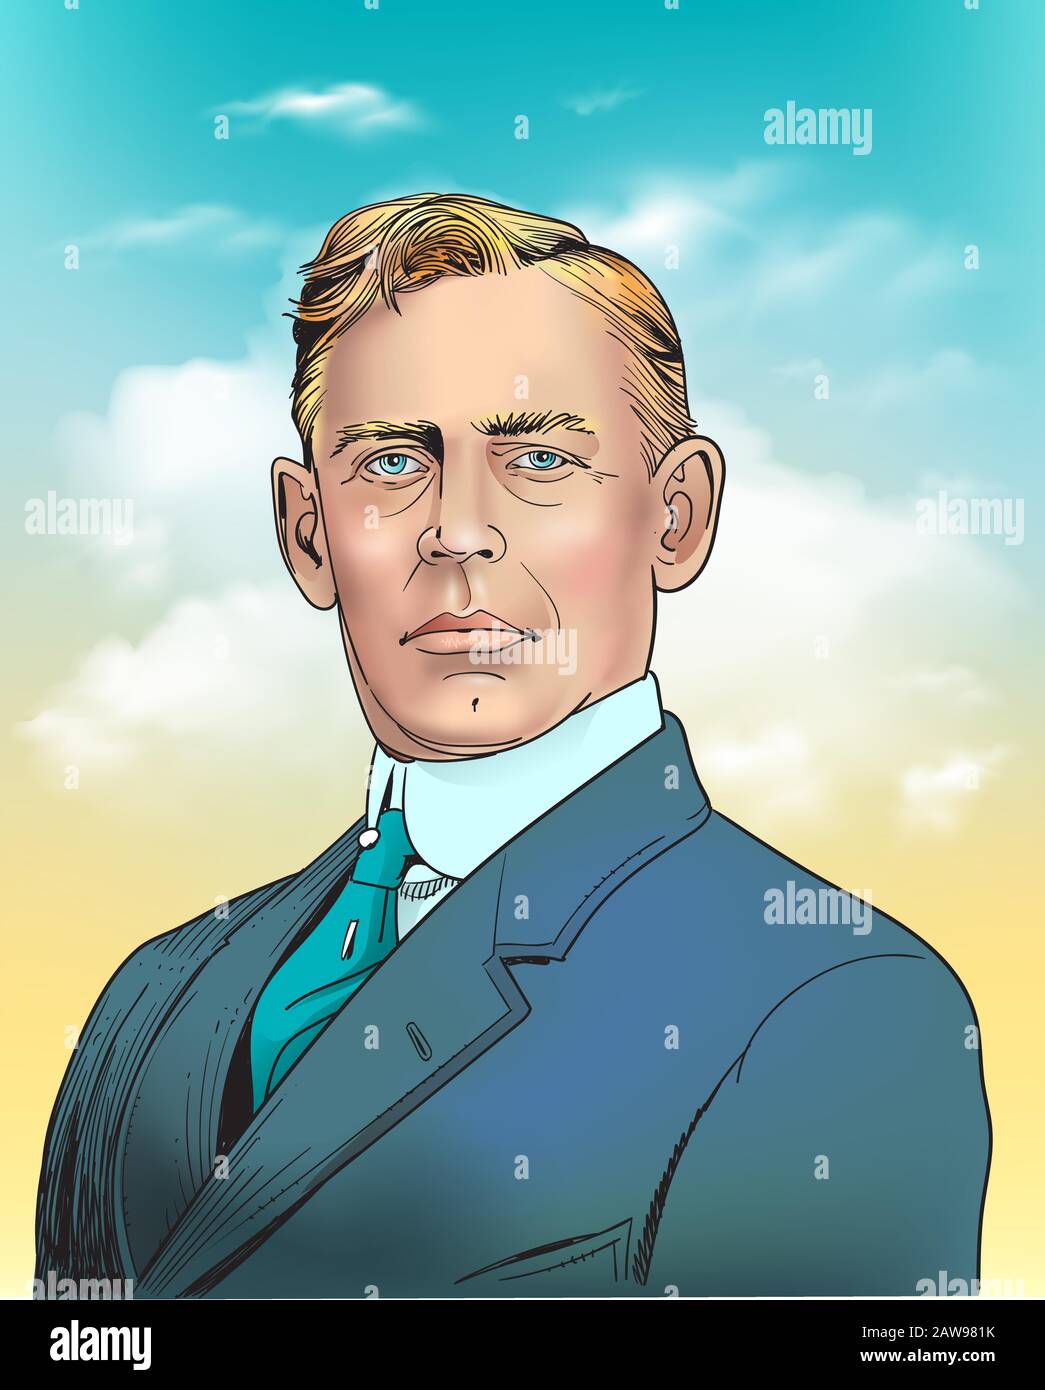 Charles Augustus Lindbergh was an American aviator, military officer, author, inventor, and activist. Stock Vector